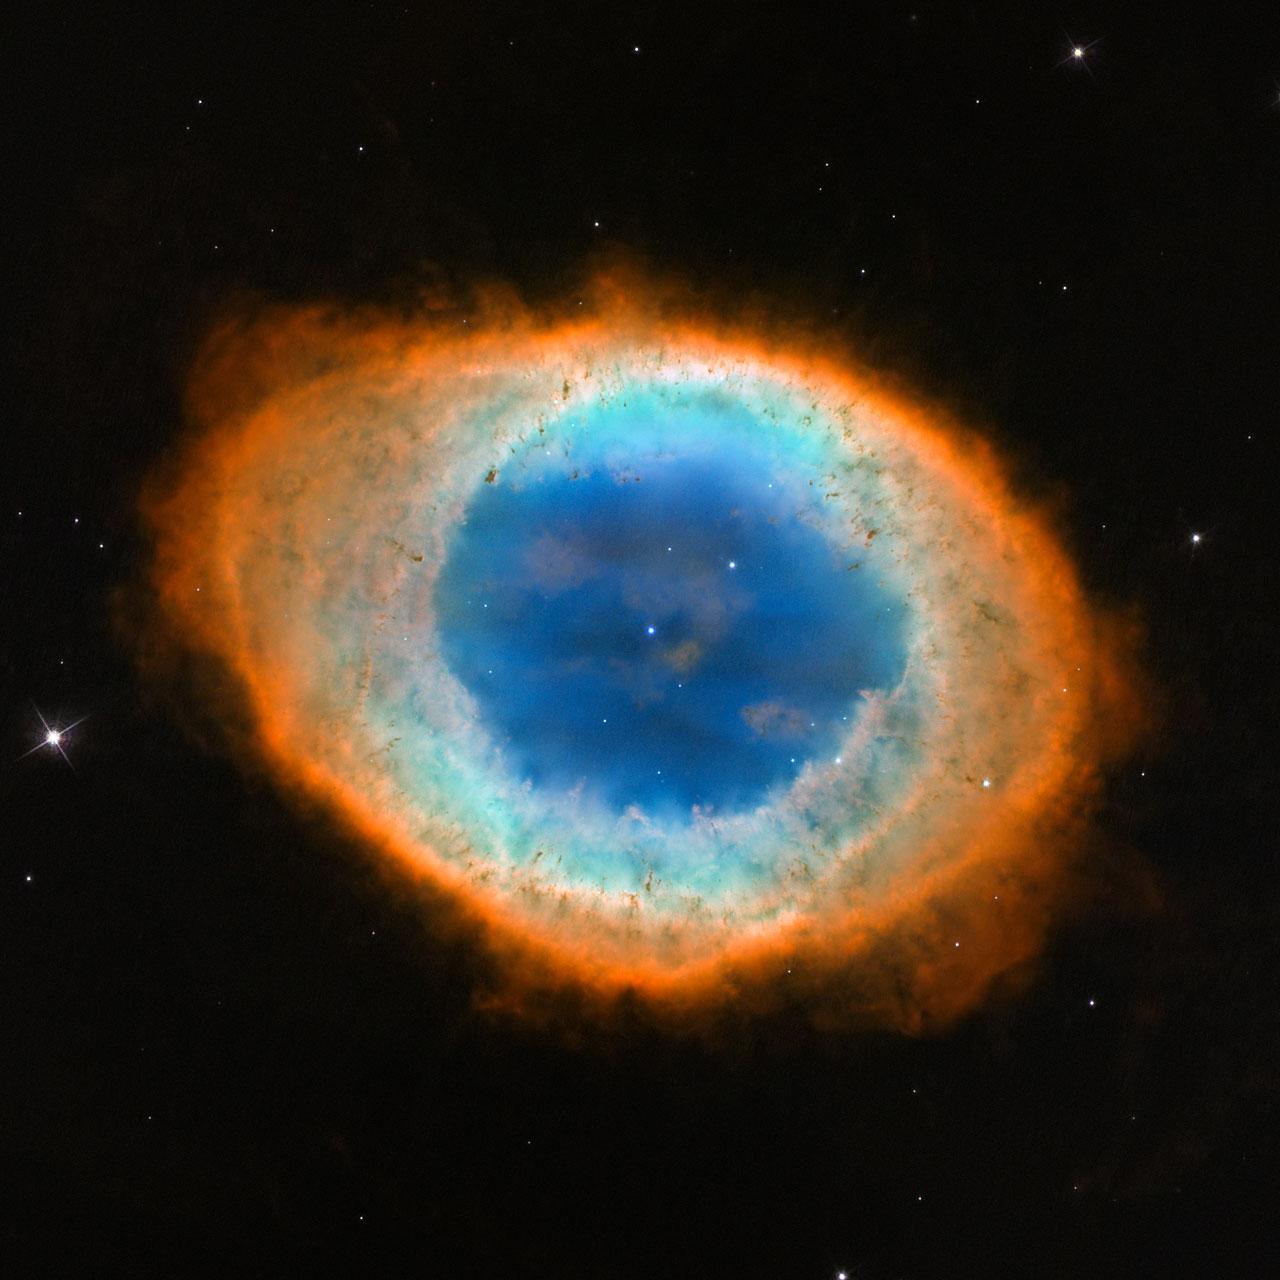 Hubble image of the Ring Nebula (Messier 57)